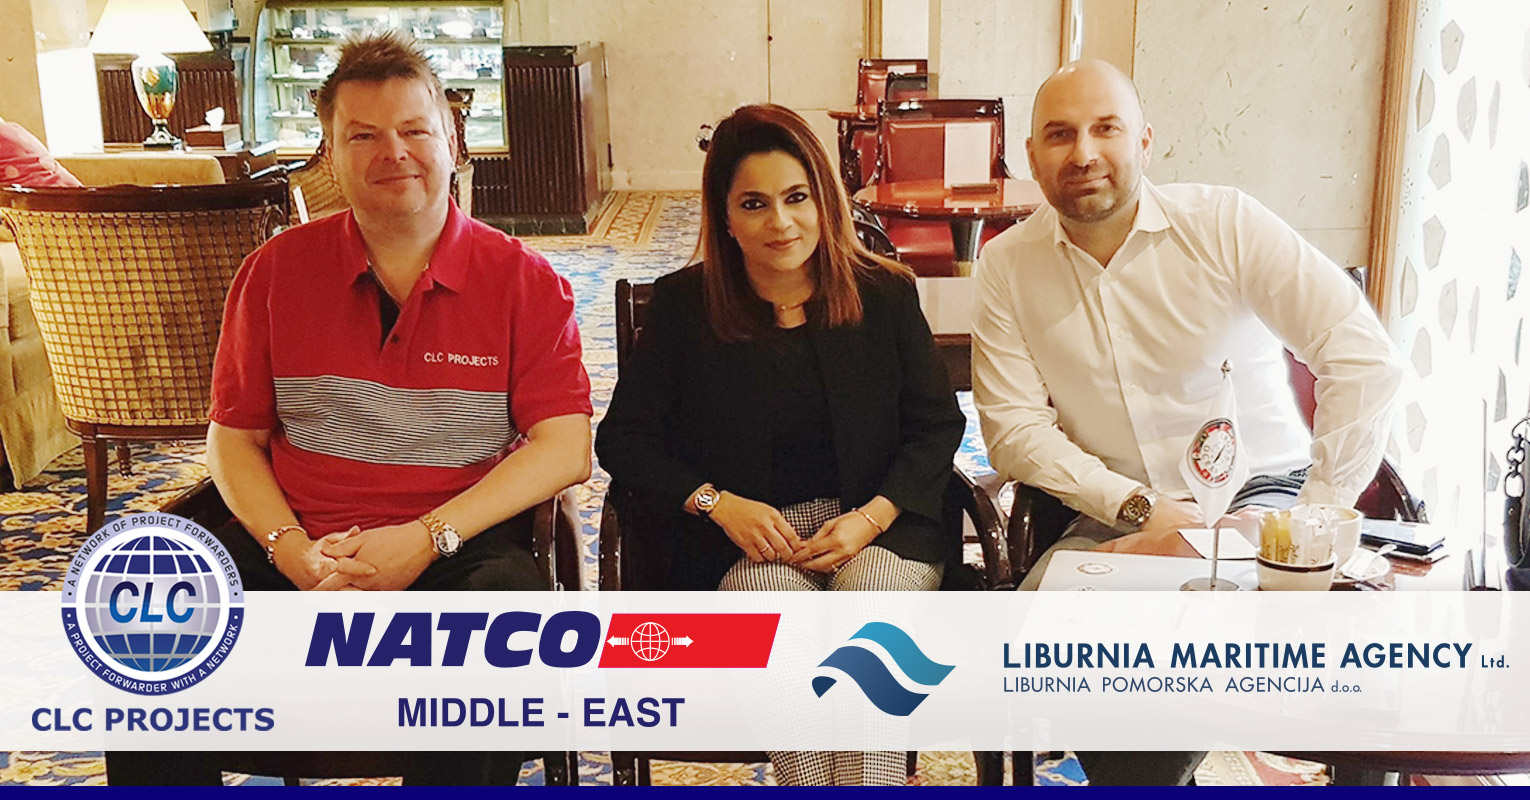 CLC Projects Chairman met with Liburnia Maritime Agency and NATCO in Dubai